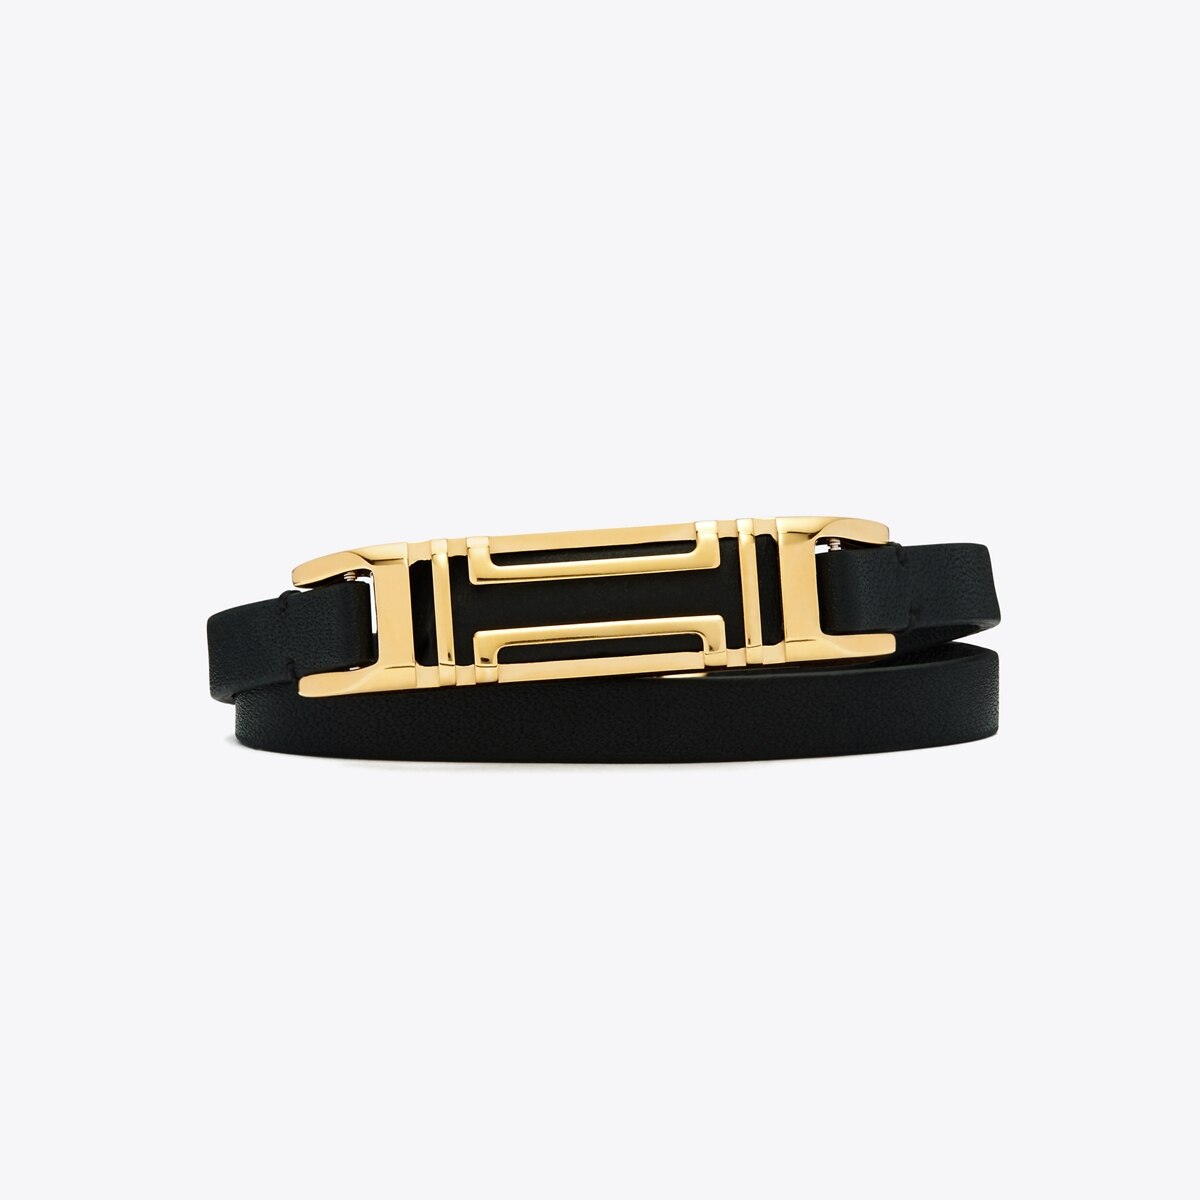 Tory Burch for Fitbit Double-Wrap 